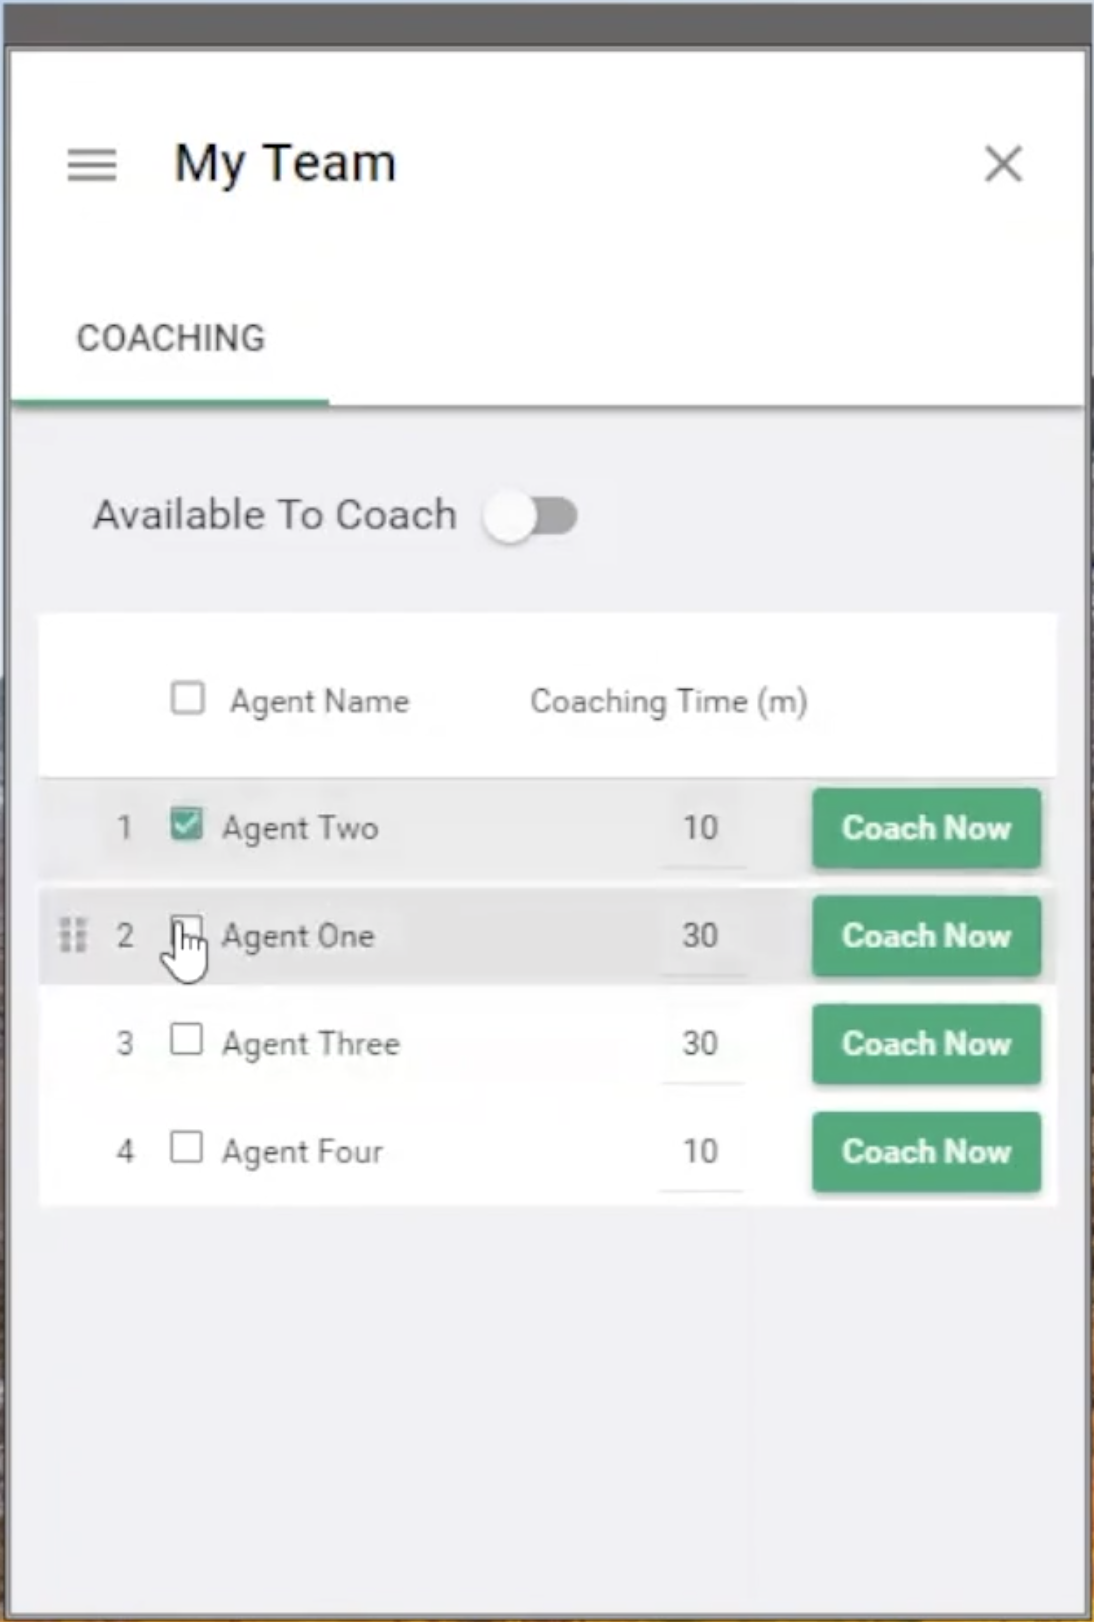 Coaching Interface for Managers